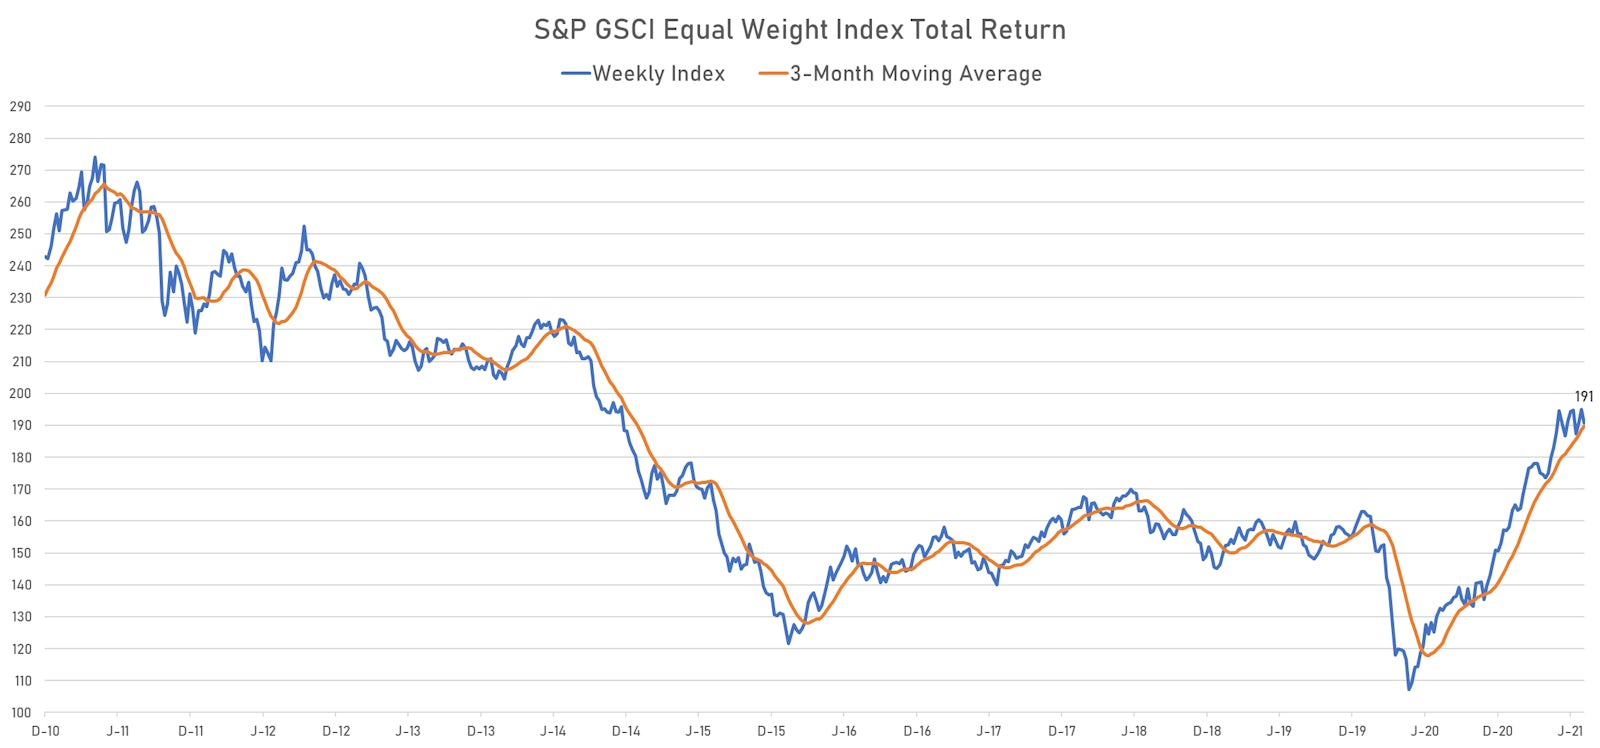 The S&P GSCI Equal Weight Index Is Sitting on Its 3-Month Moving Average | Sources: ϕpost, Refinitiv data